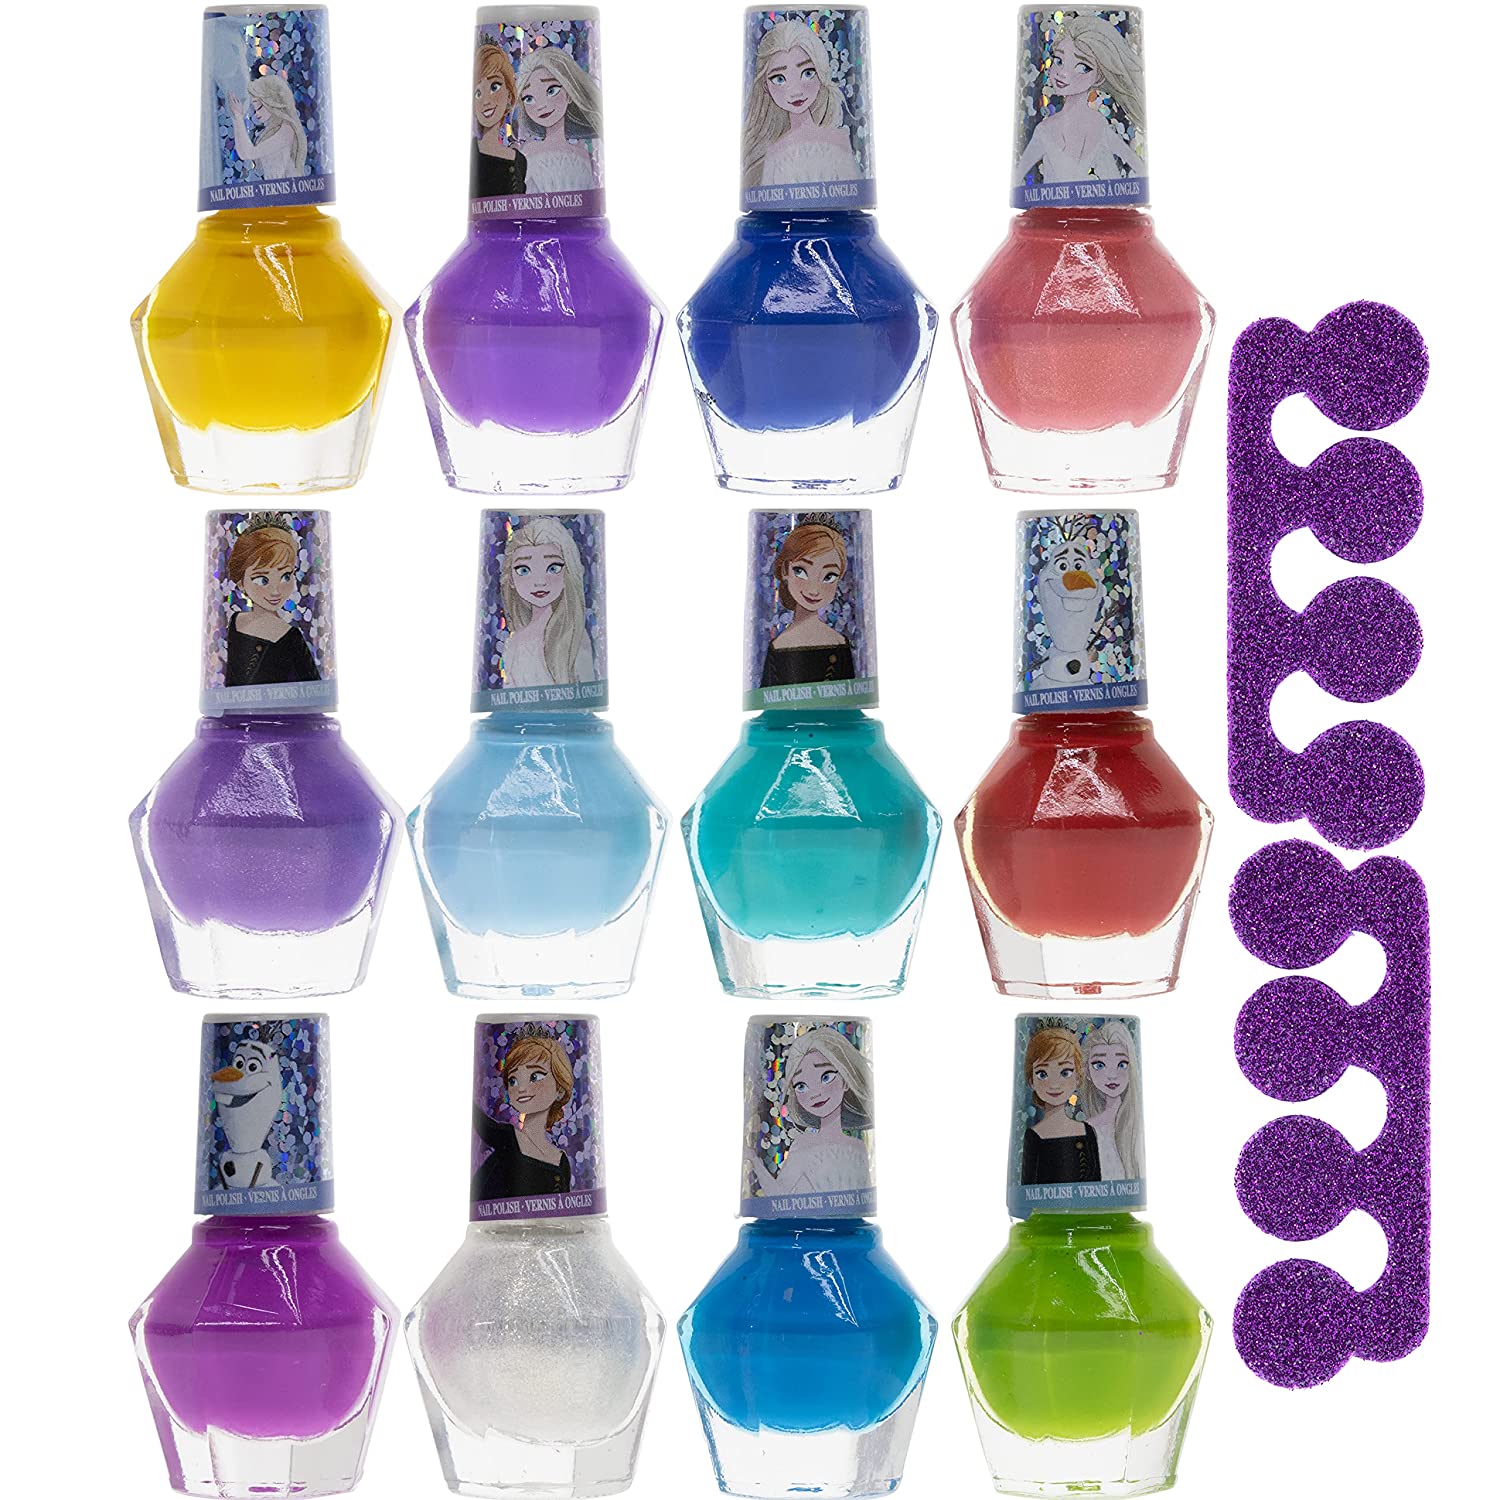 Disney Frozen - Townley Girl Non-Toxic Peel-Off Water-Based Natural Safe Quick Dry Nail Polish Gift Kit Set for Kids Toddler Girls Set With Bonus Nail Files, 12 Pcs (All Solid Colors)